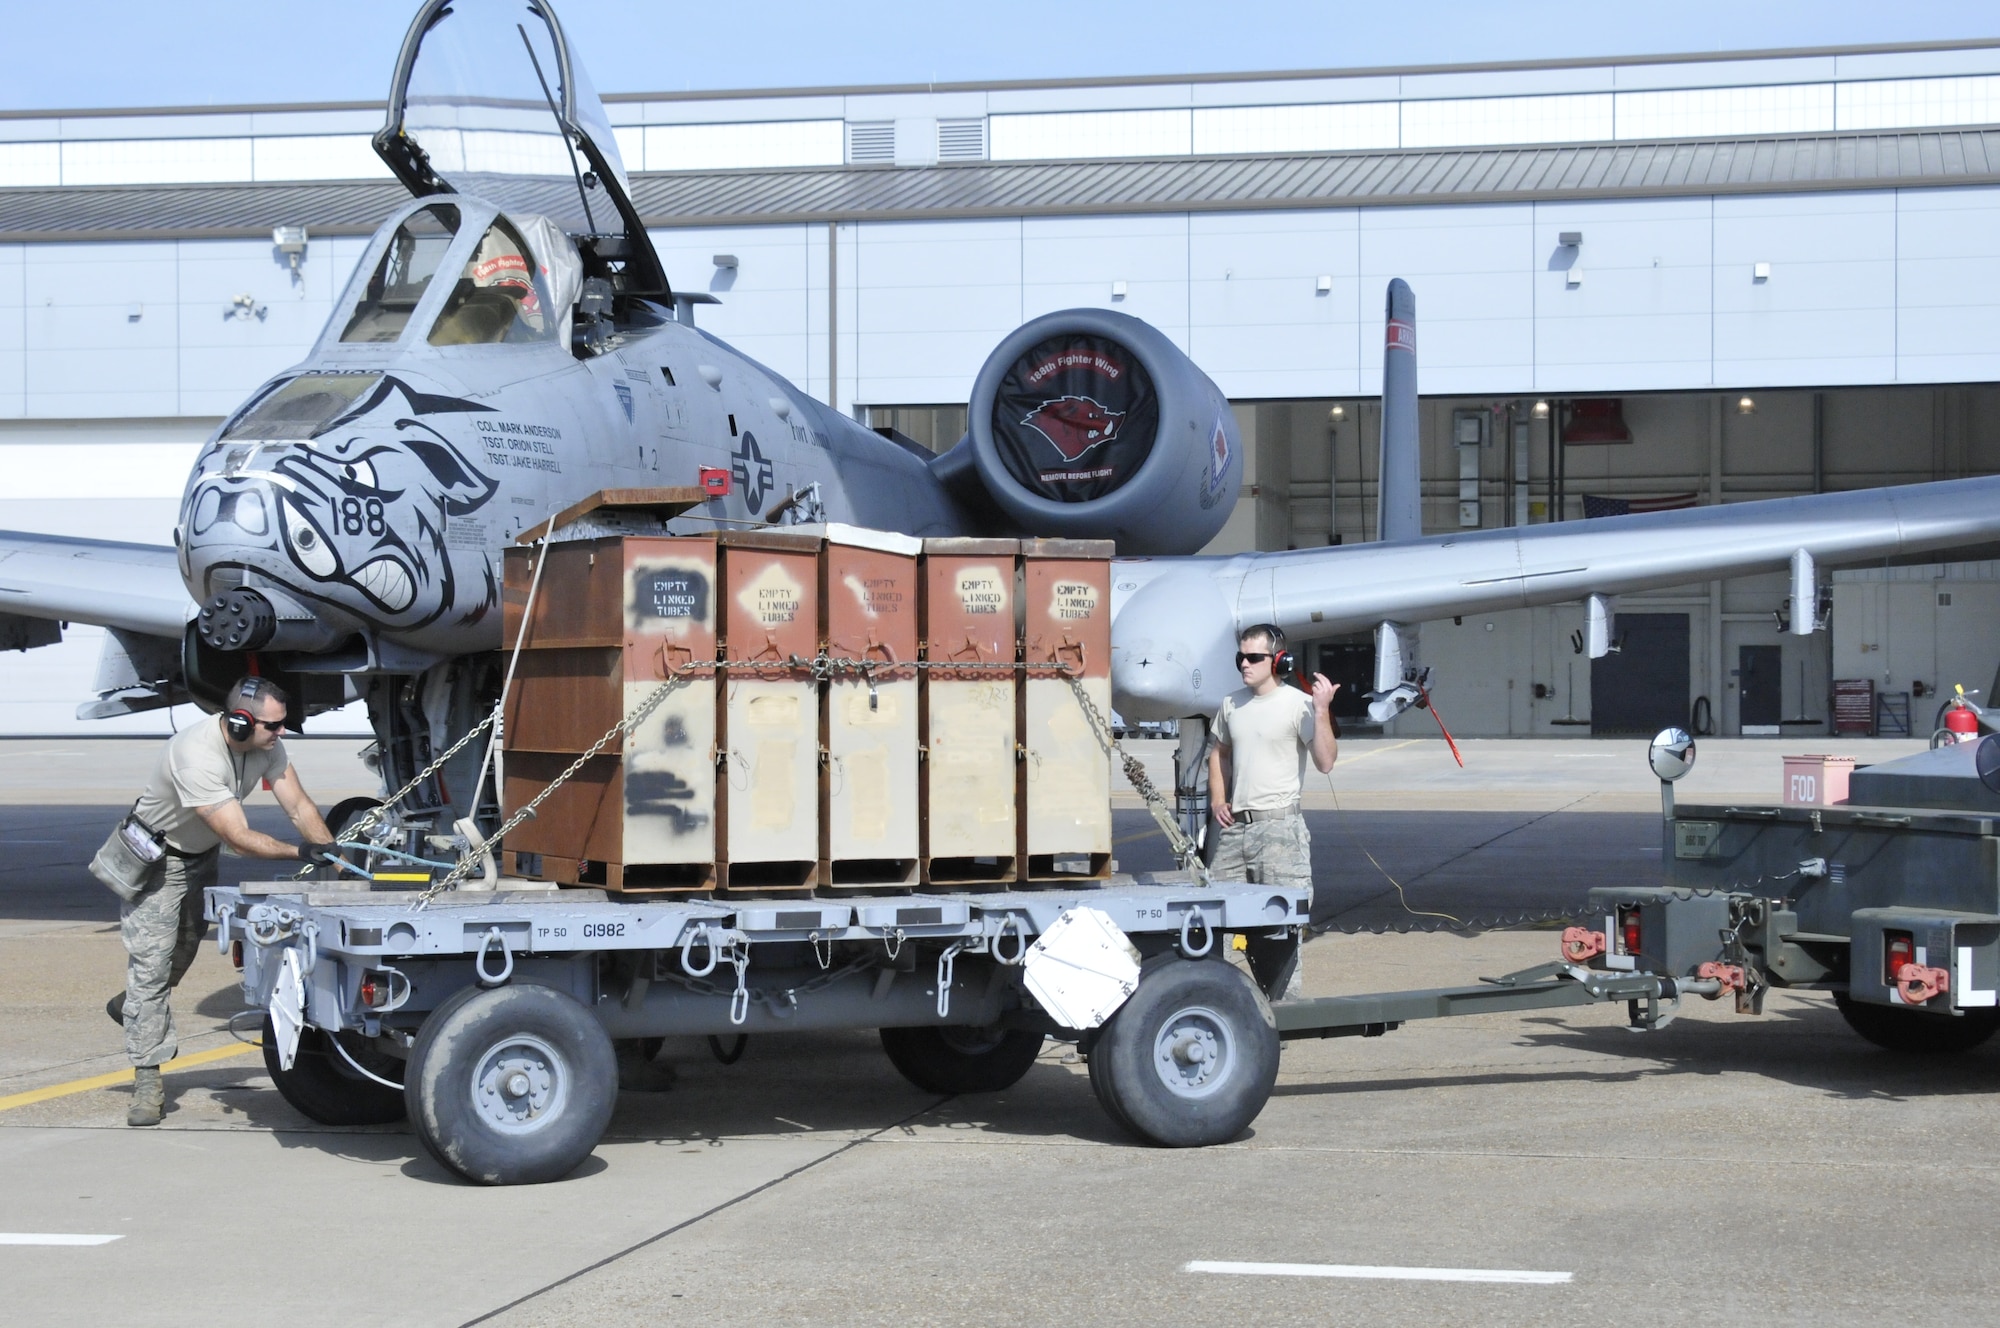 Airmen from the 188th Aircraft Maintenance Squadron’s Weapons Element conduct the last 30mm Gatling gun download on an A-10C Thunderbolt II “Warthog” aircraft at Ebbing Air National Guard Base, Fort Smith, Arkansas, May 19, 2014. The unit is currently converting from a fighter mission to a remotely piloted aircraft, intelligence, reconnaissance, surveillance and reconnaissance mission. The last two aircraft will leave during the June 7, 2014. (U.S. Air National Guard photo by Tech. Sgt. Josh Lewis/released) 